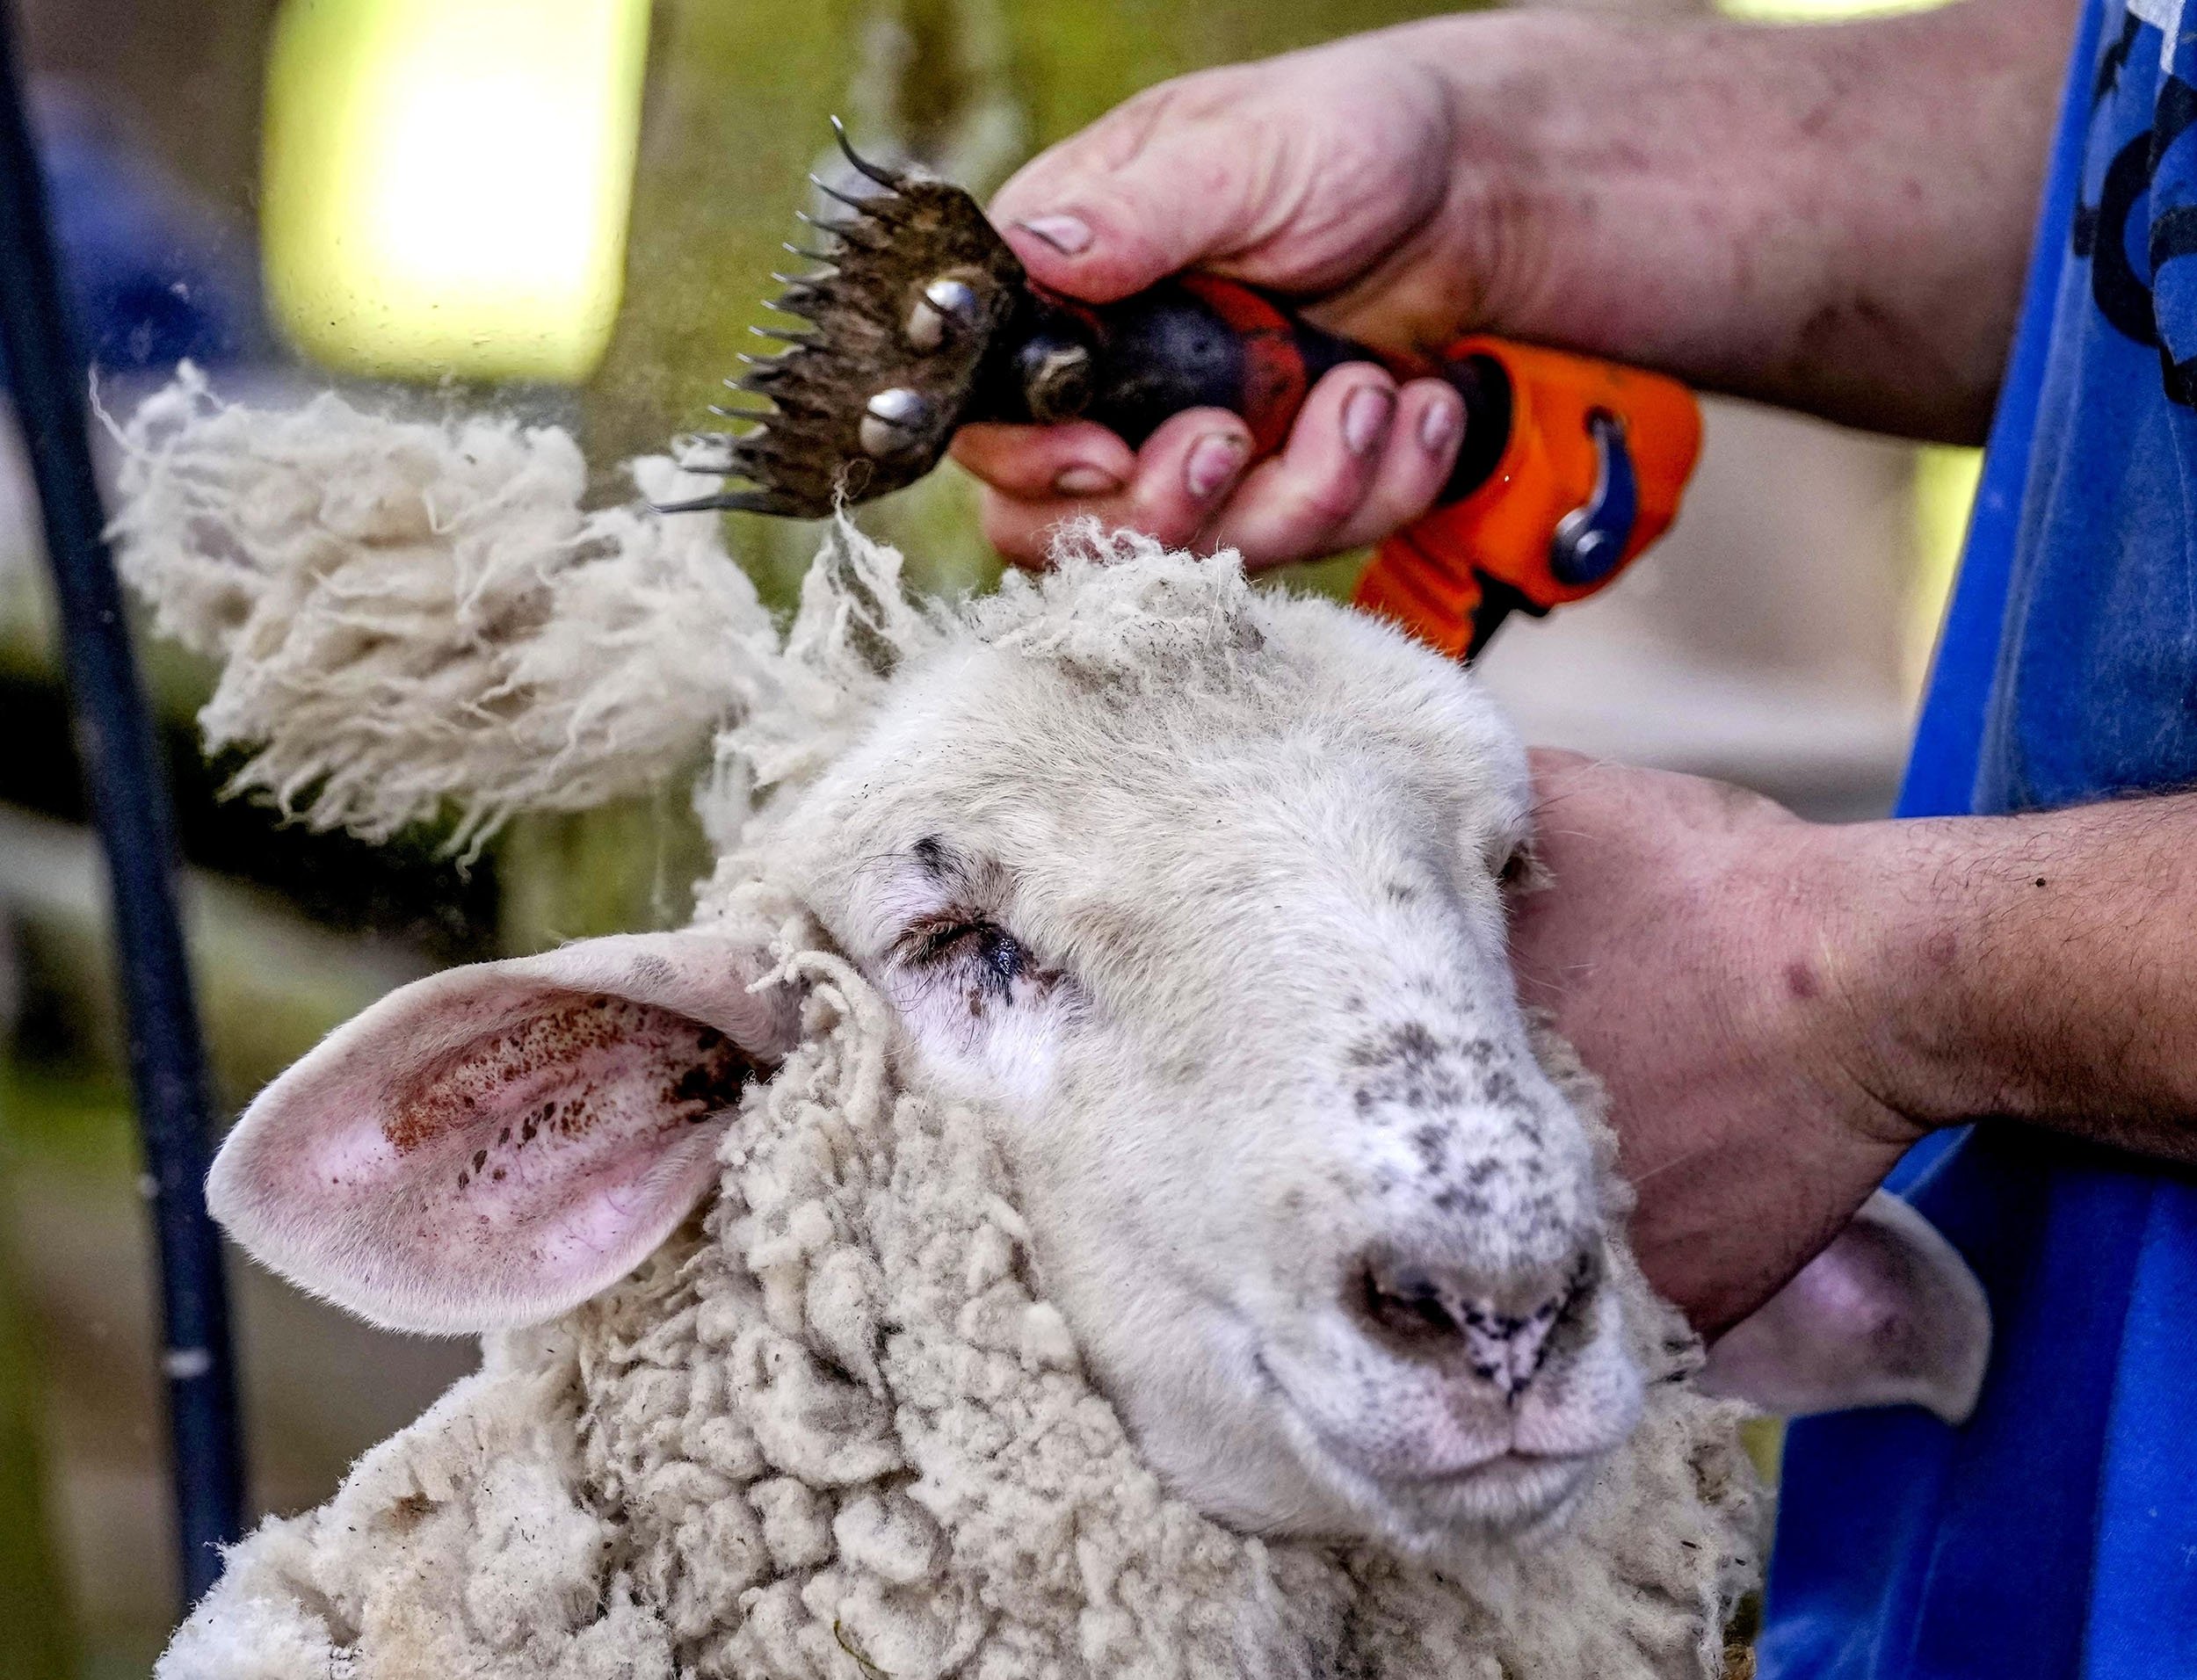 Shearing time: Sheep get fresh summer trim in Germany's mountains | Daily  Sabah